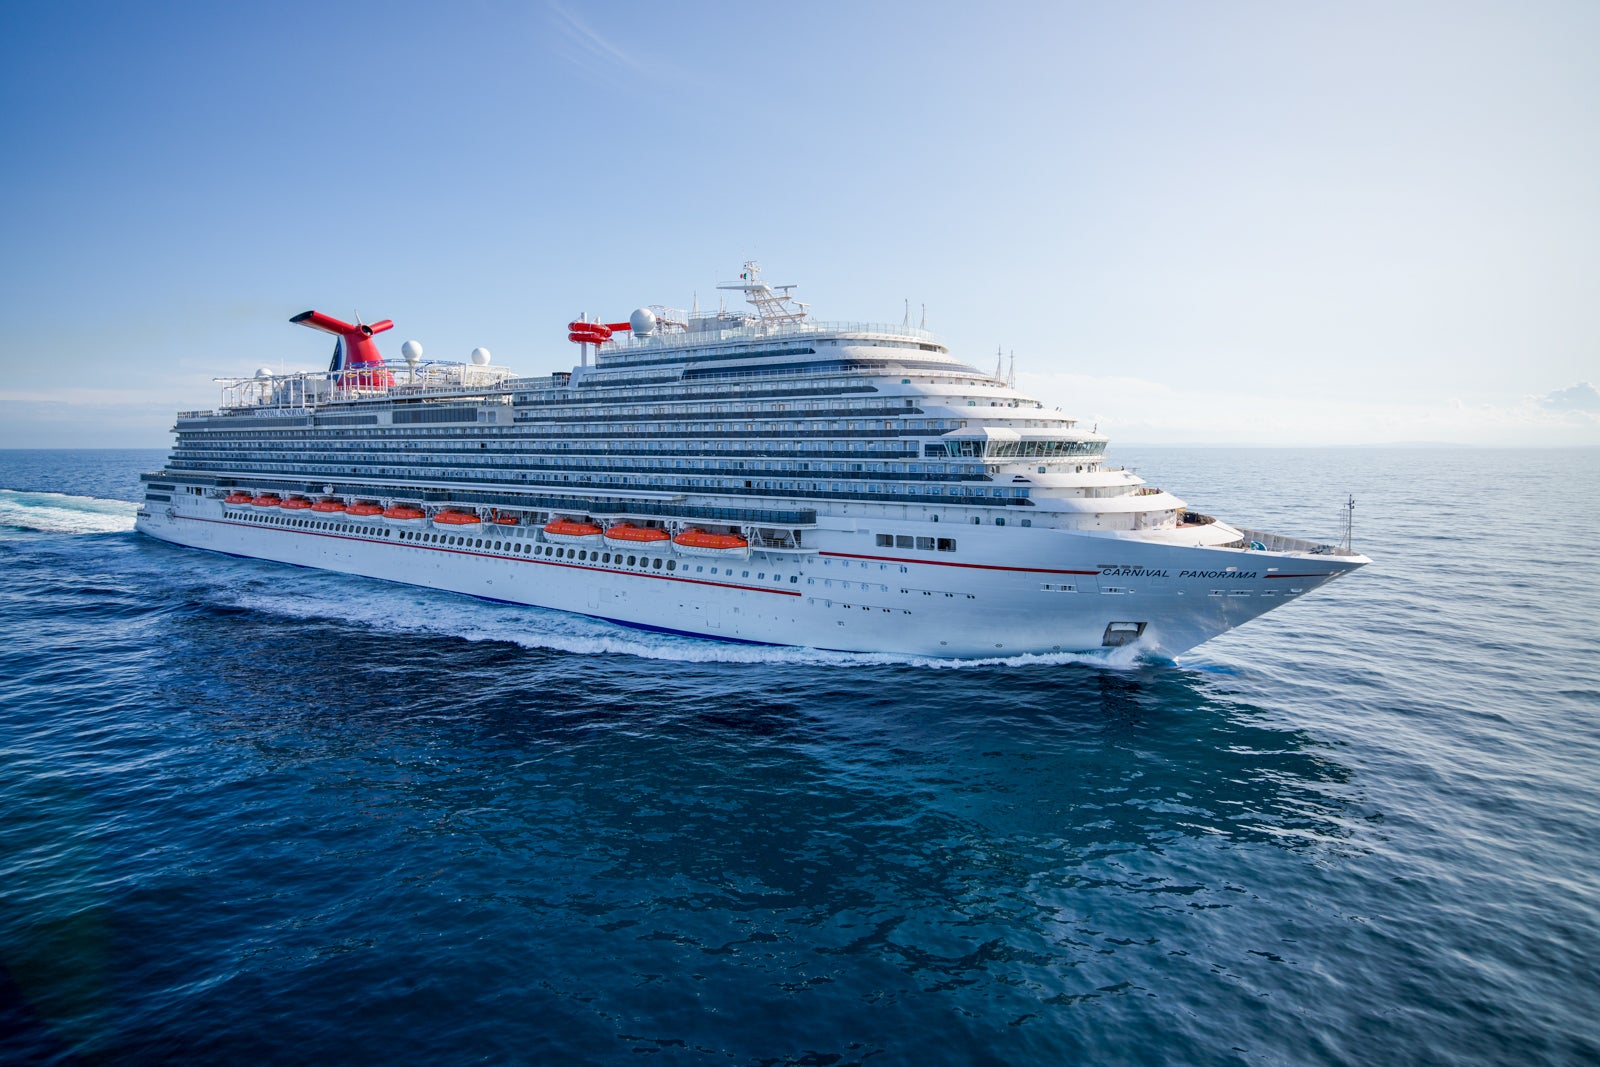 Plaub Tech News The 8 classes of Carnival Cruise Line ships, explained